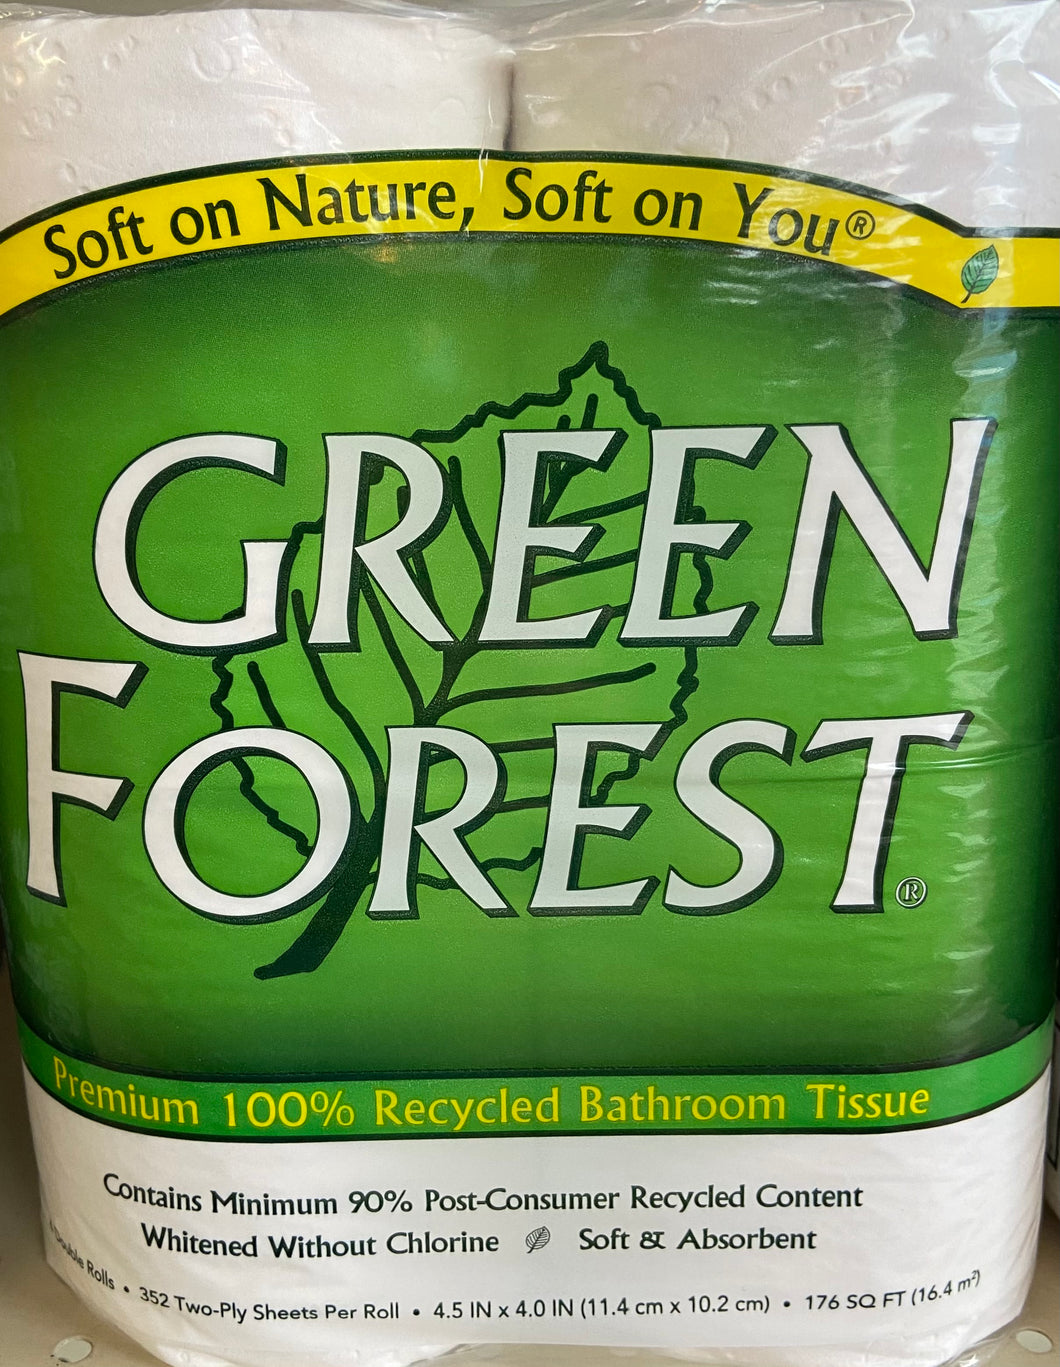 Toilet Tissue, 4 rolls, 100% Recycled, 90% Post Consumer Recycled, Green Forest